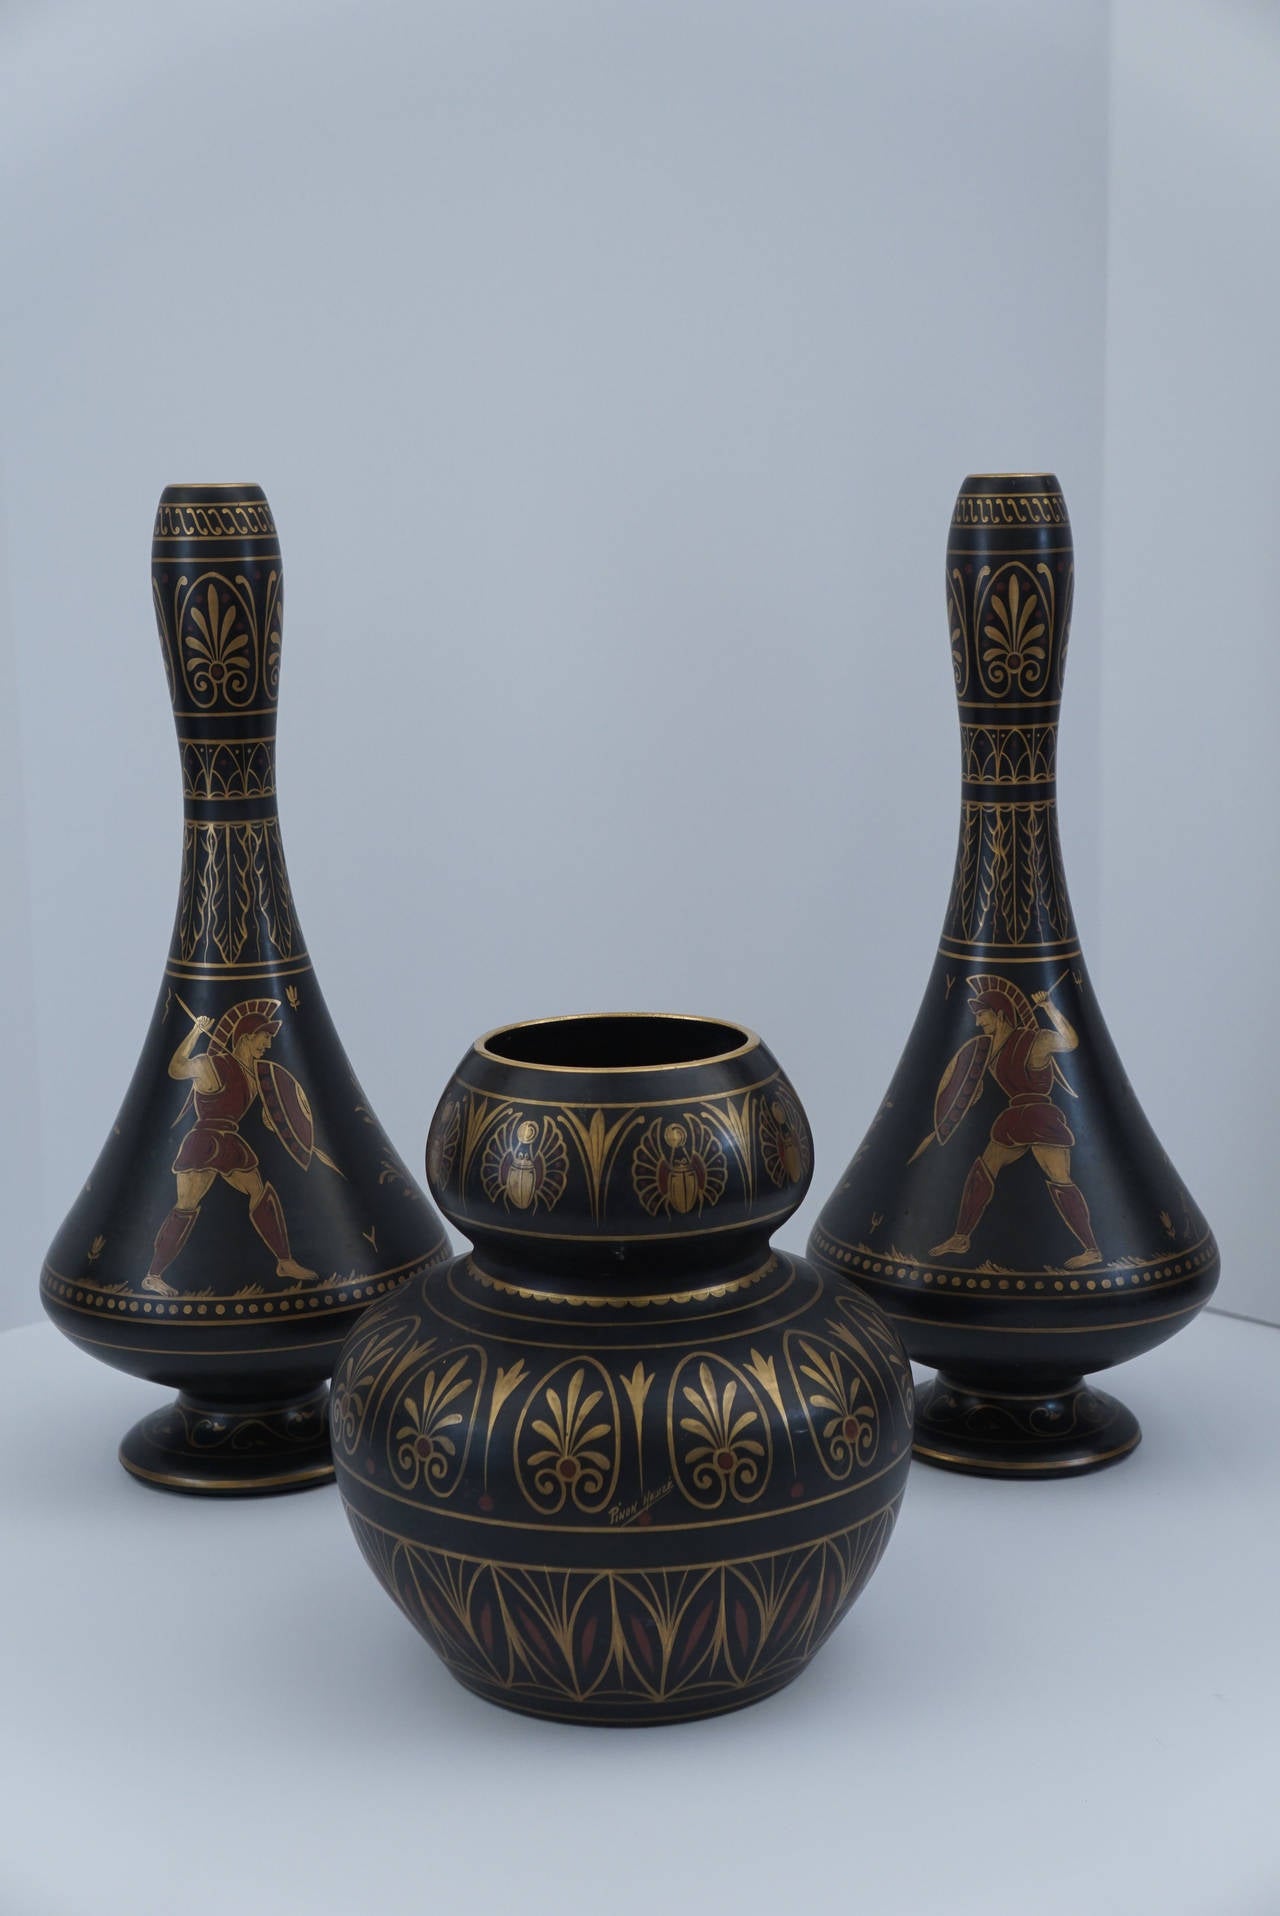 This unusual garniture was made in France and is marked correspondingly by the pottery company Alexander Bigot. Created from hand shaped terracotta which has been glazed then hand painted in gold and polychrome colors.  The painting is done in the